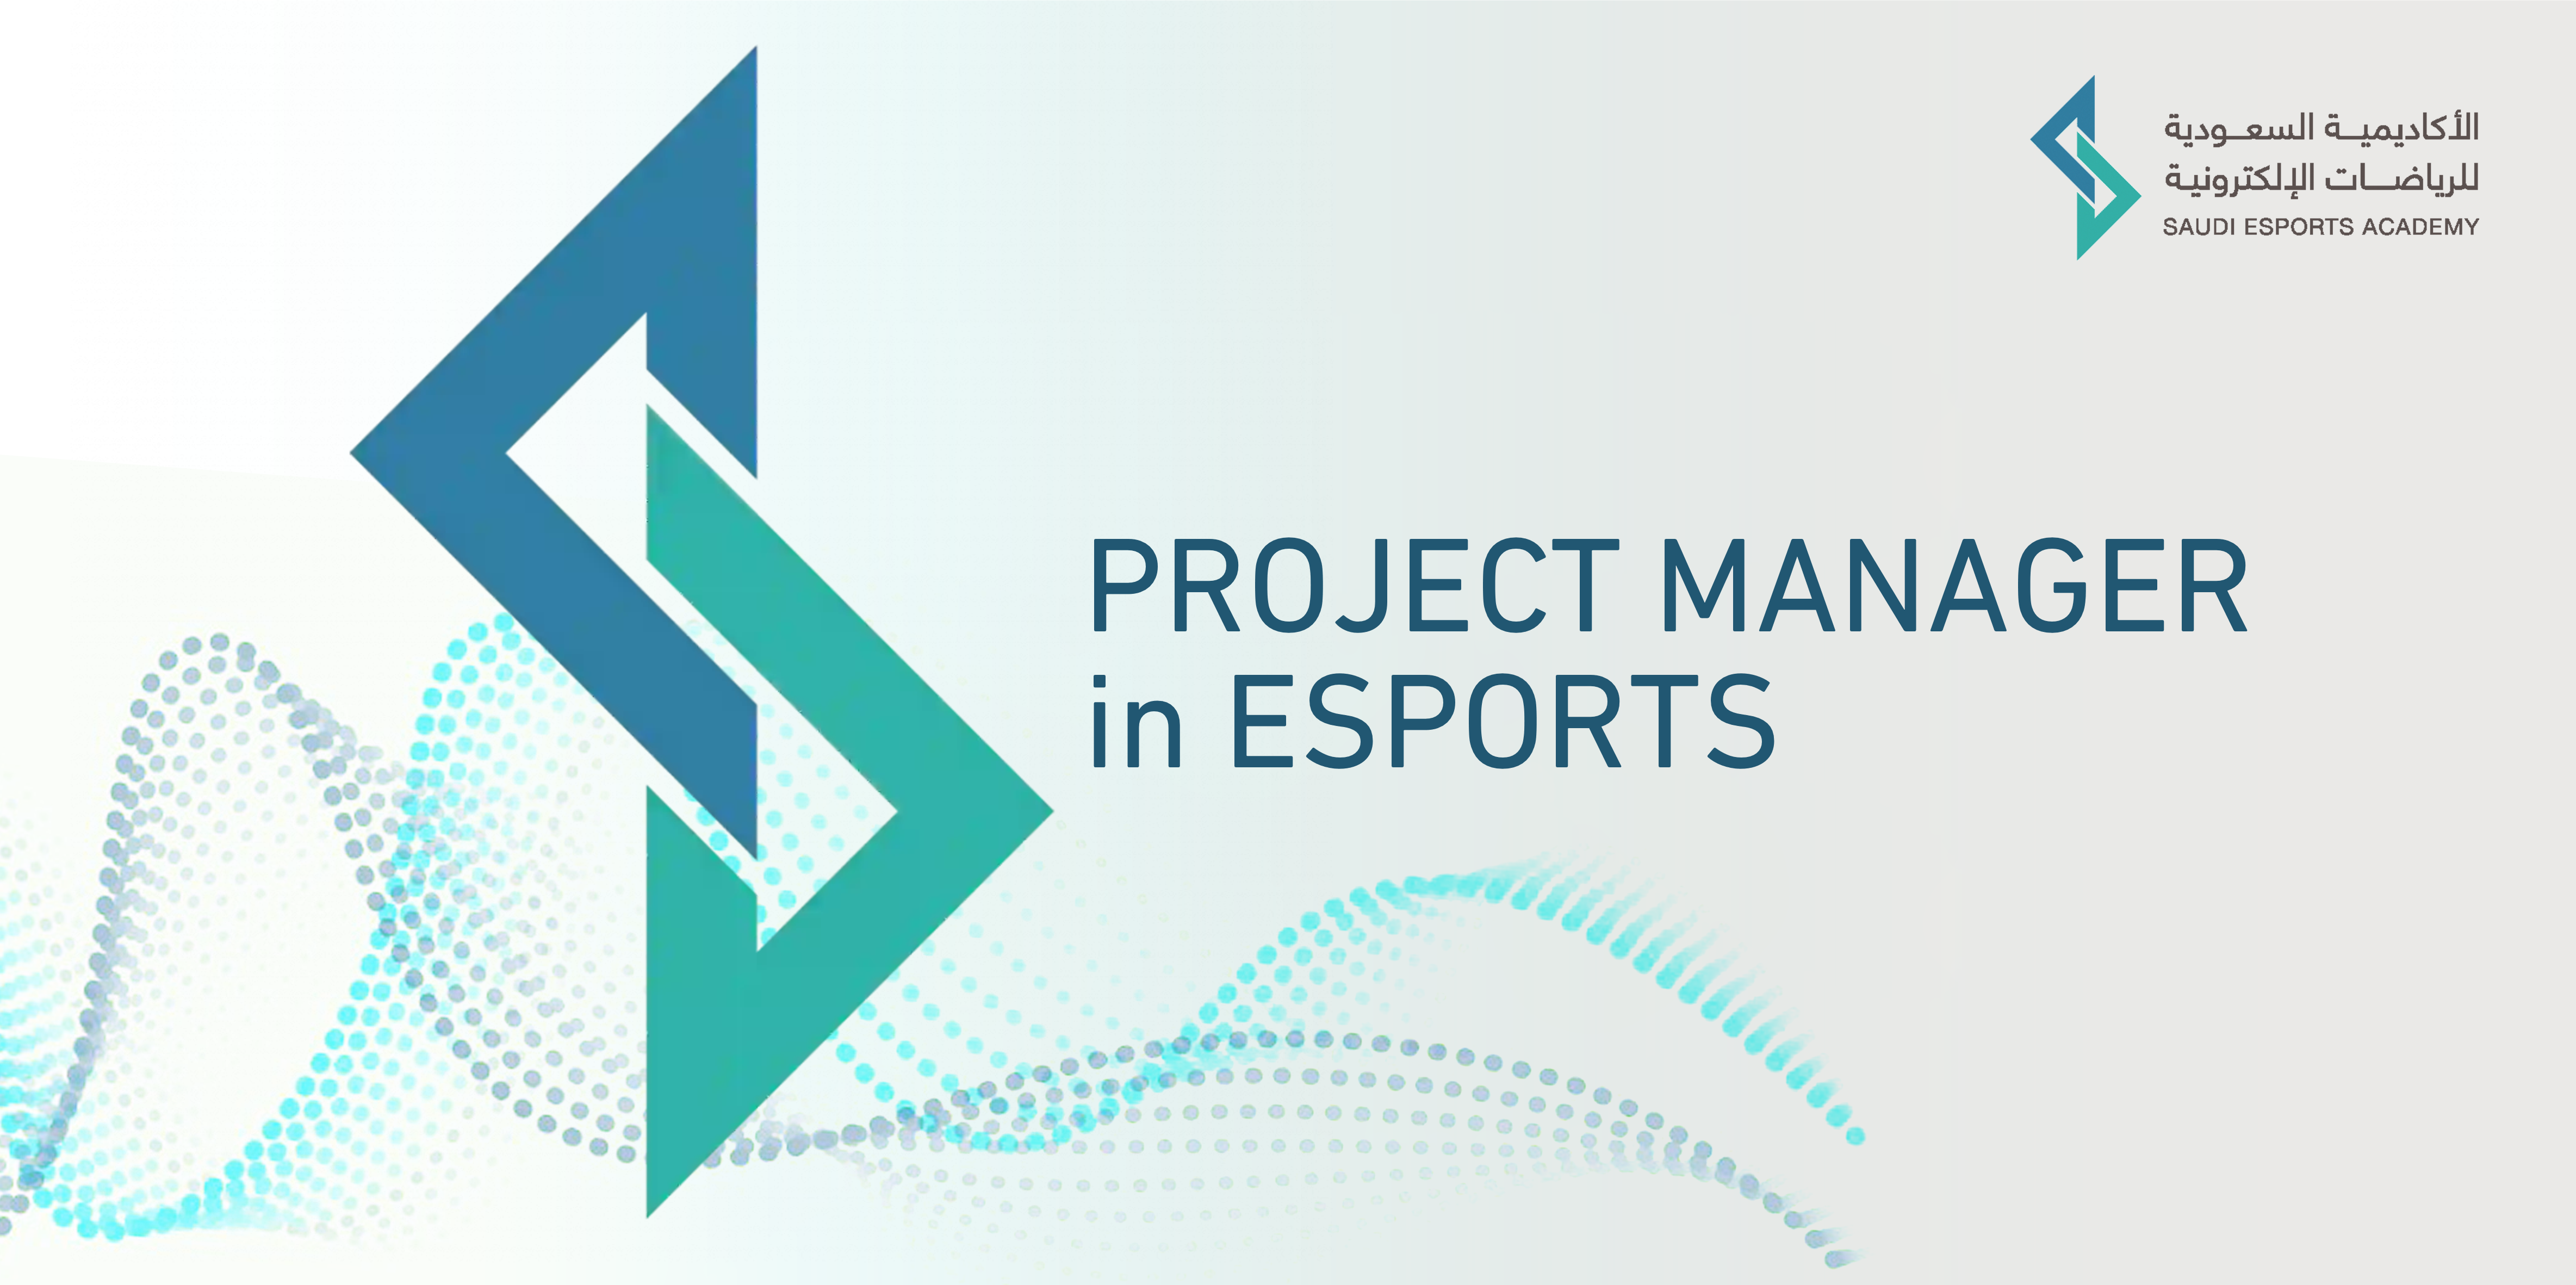 PROJECT MANAGER in ESPORTS 102